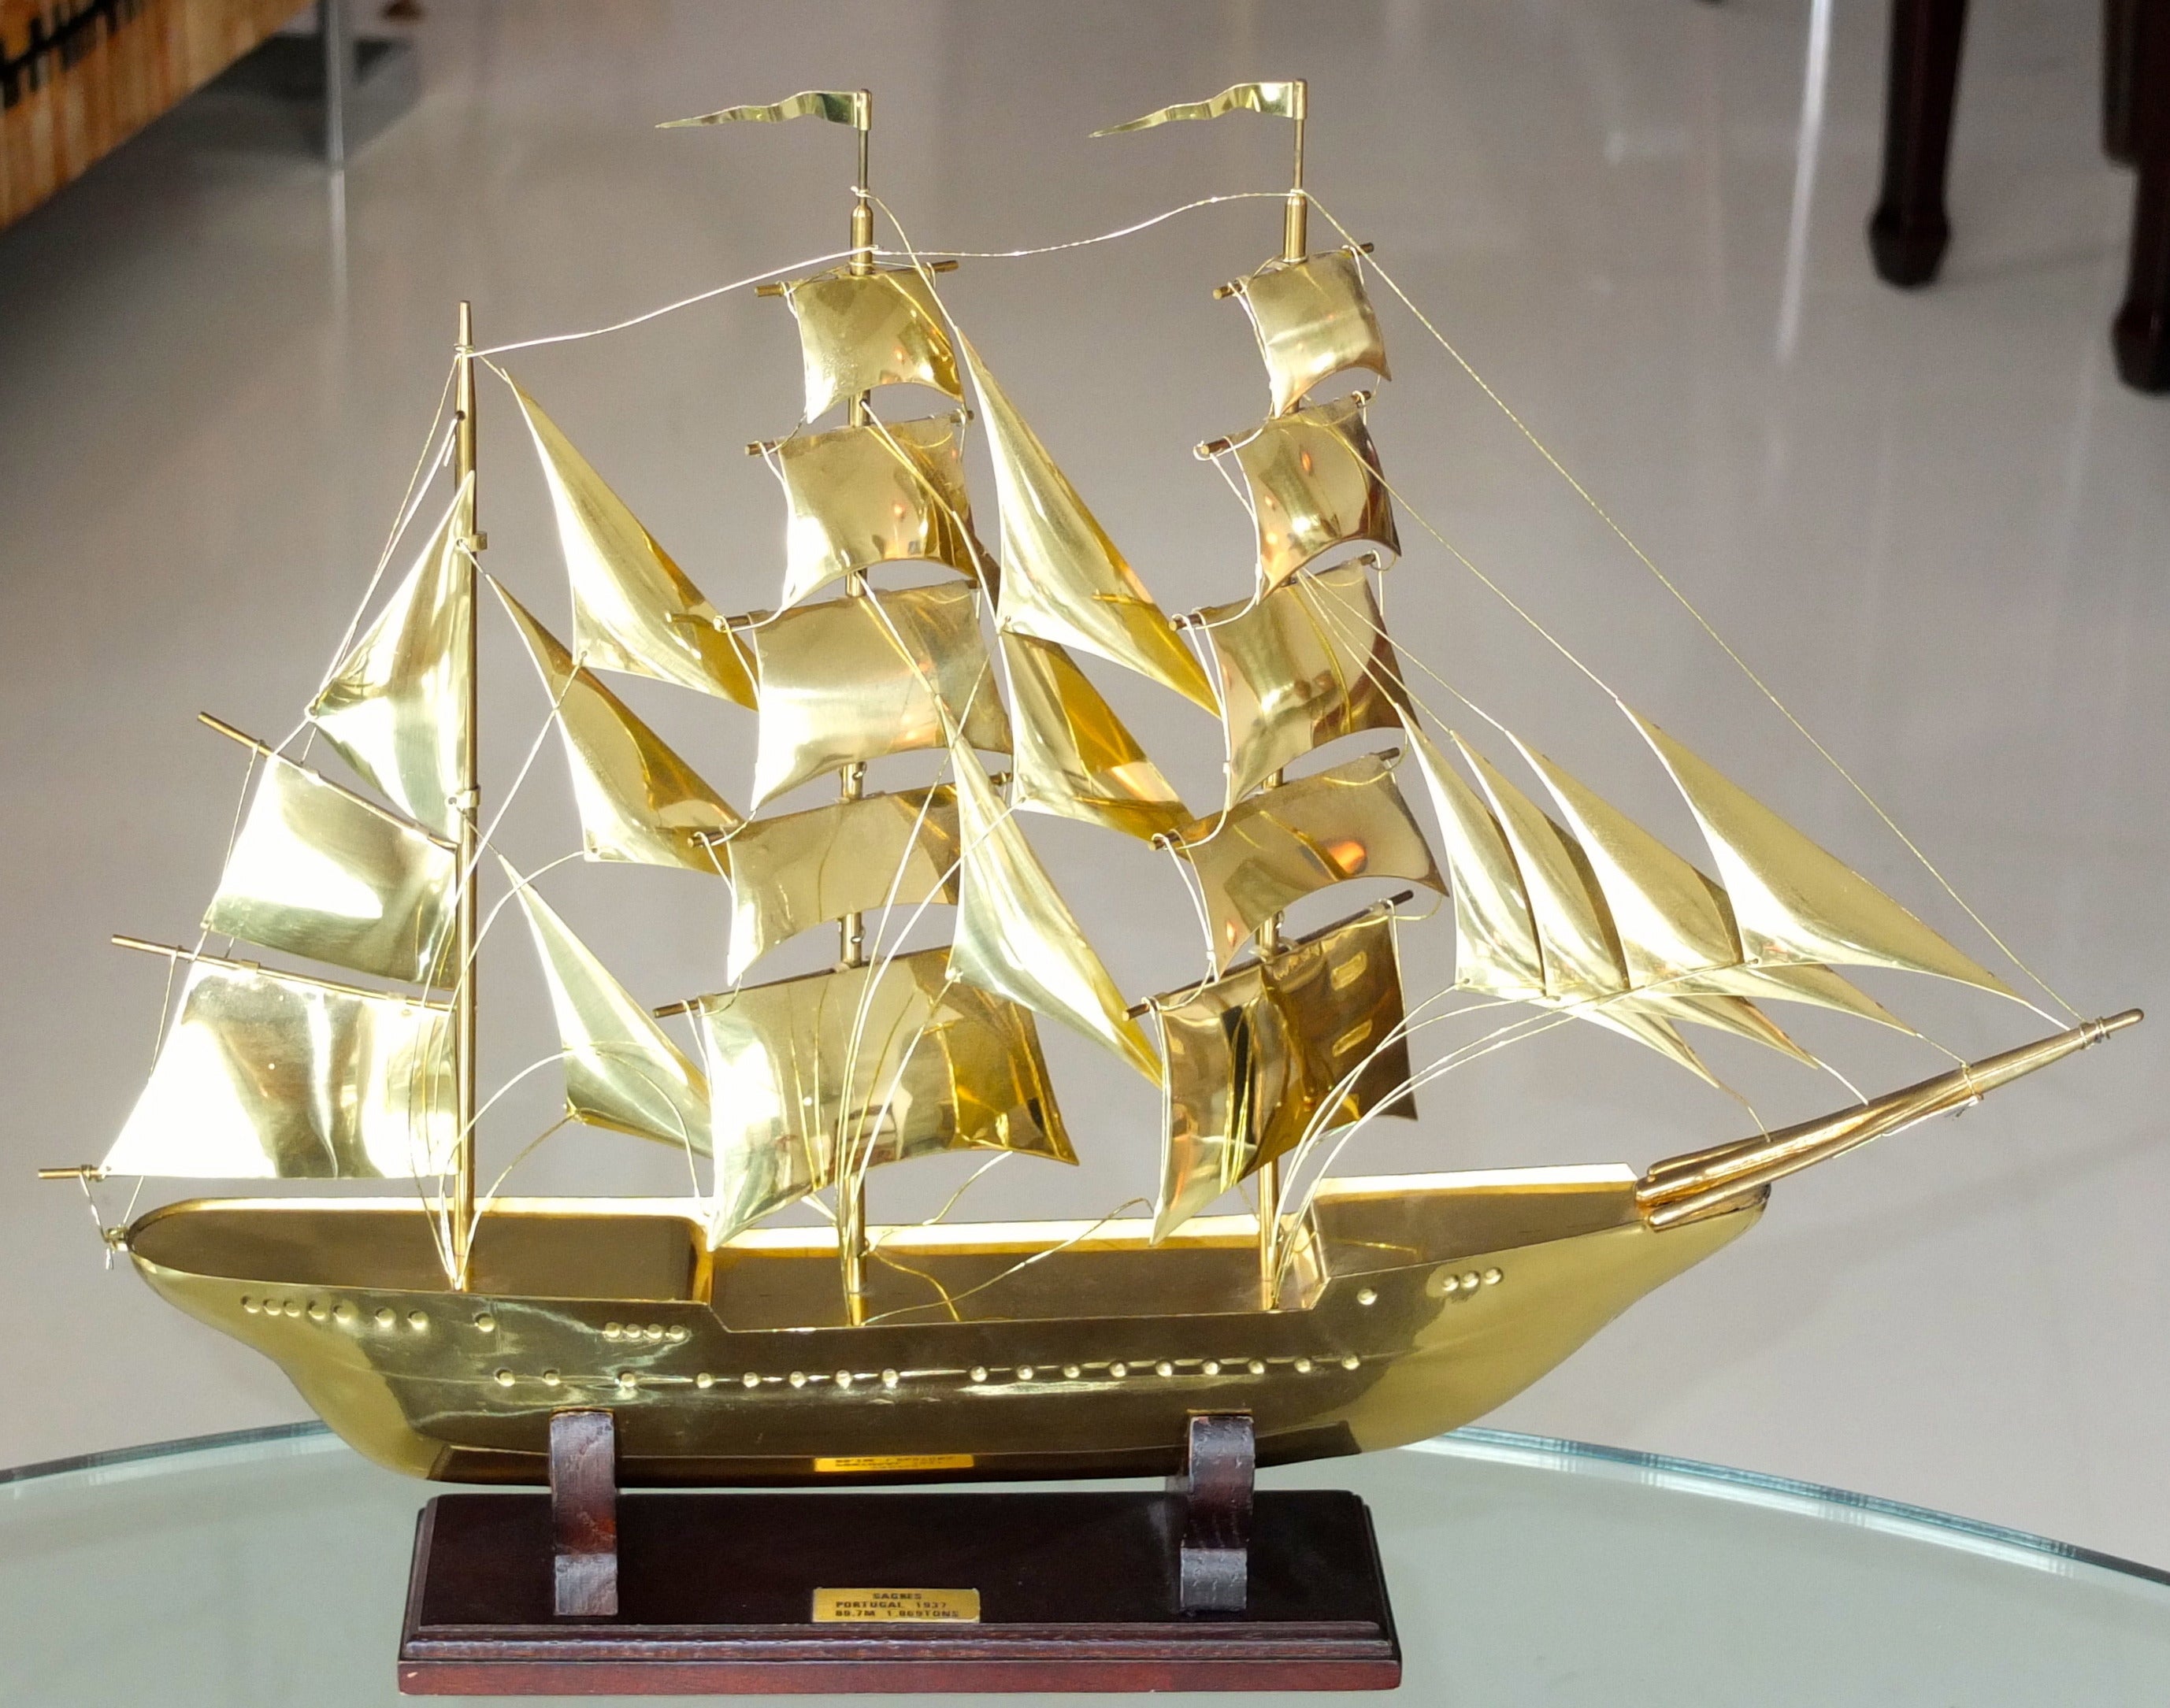 Brass Scale Model Of Tall Ship "Sagres"